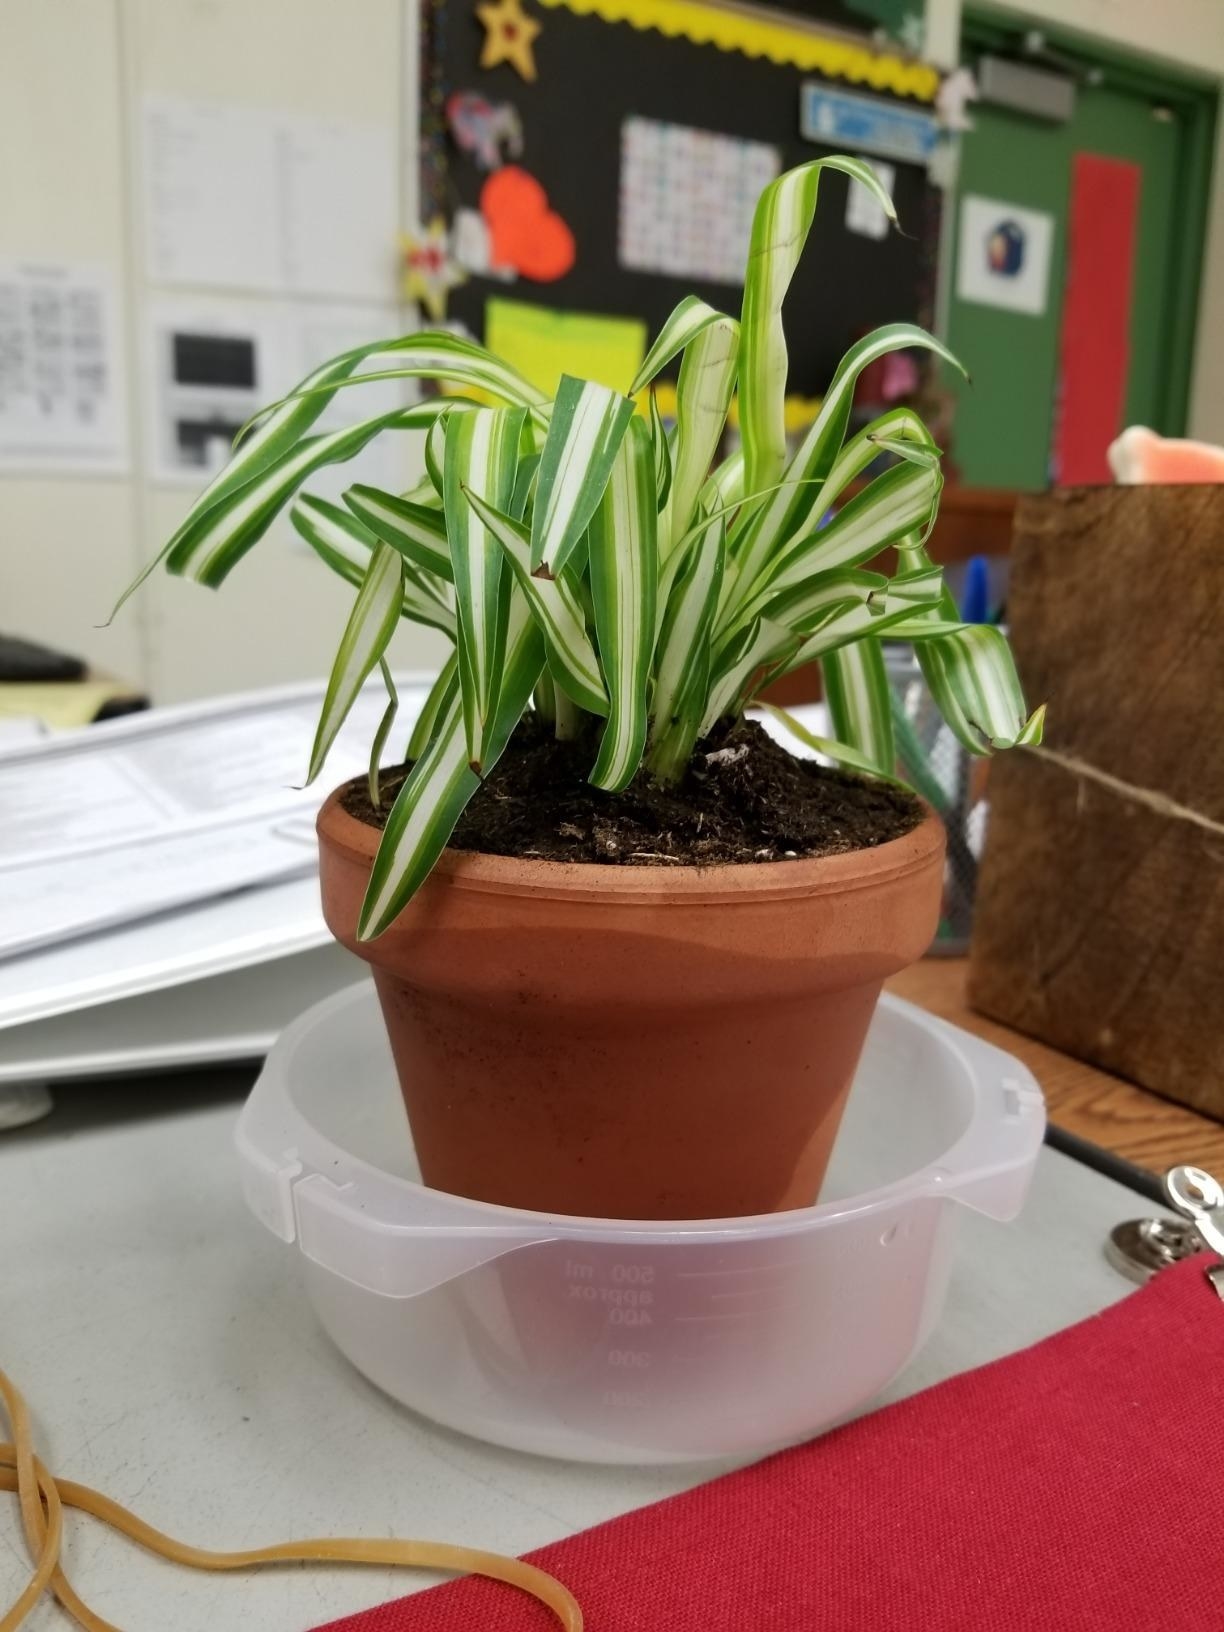 A reviewer showing their small plant with long green leaves